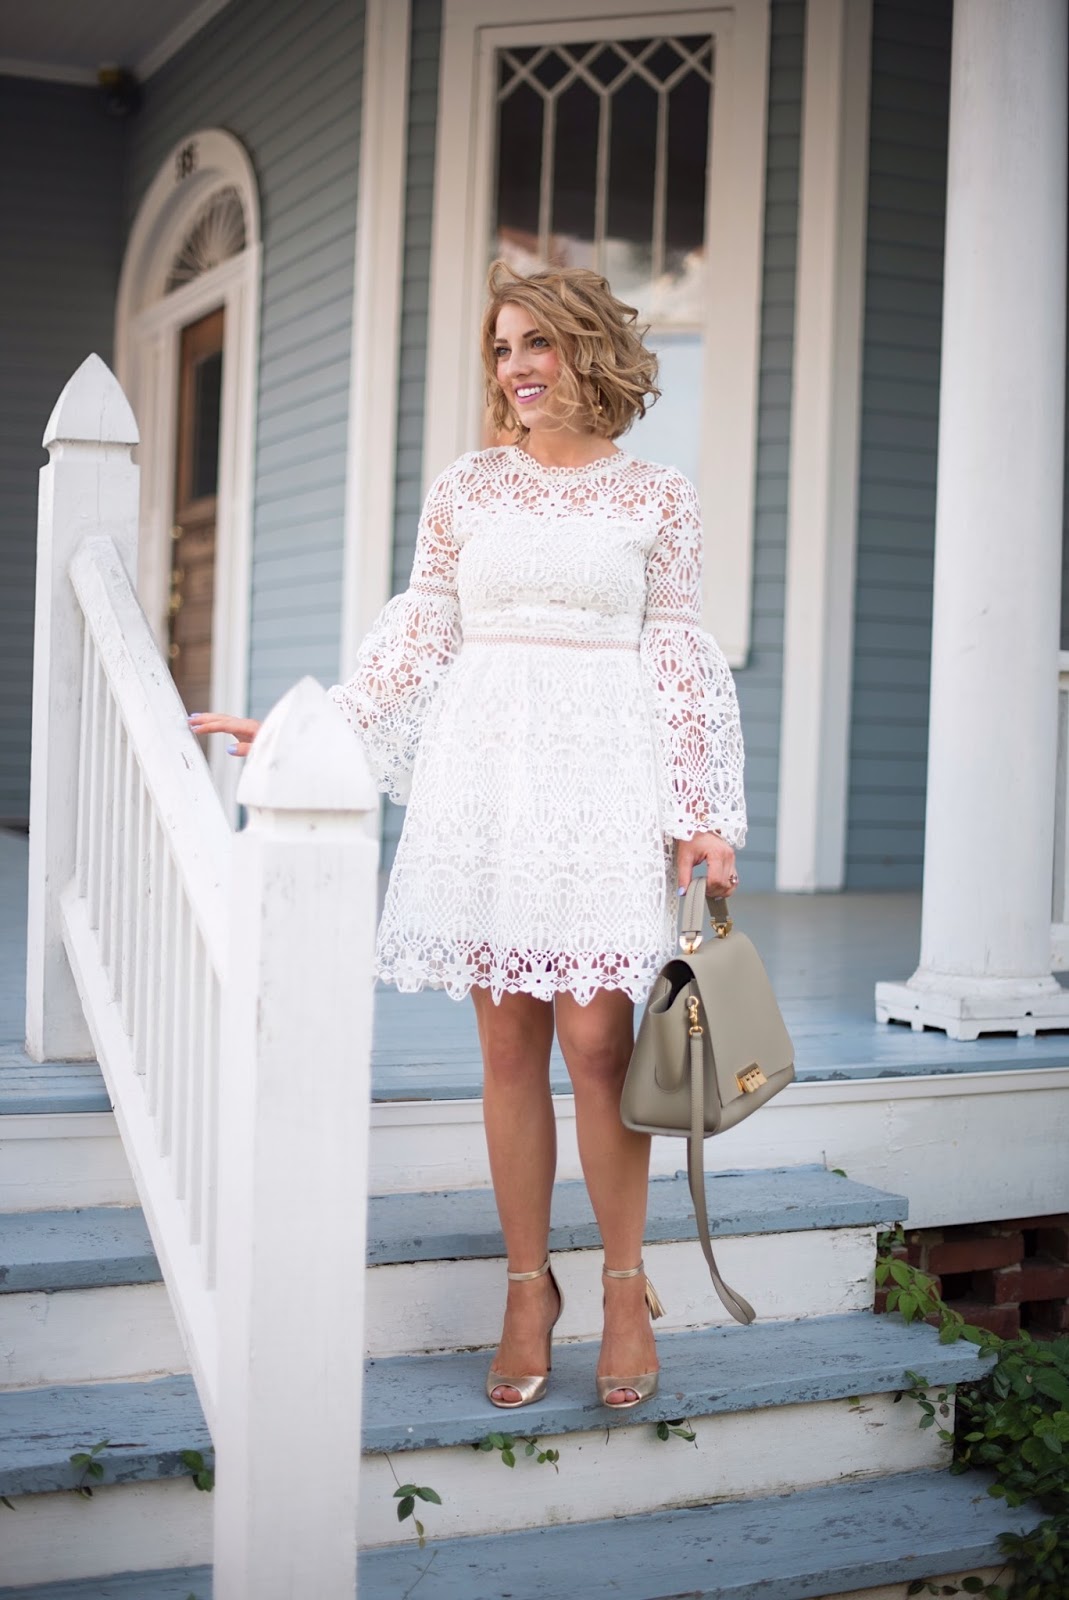 White Lace Dress - Click through to see more on Something Delightful Blog!